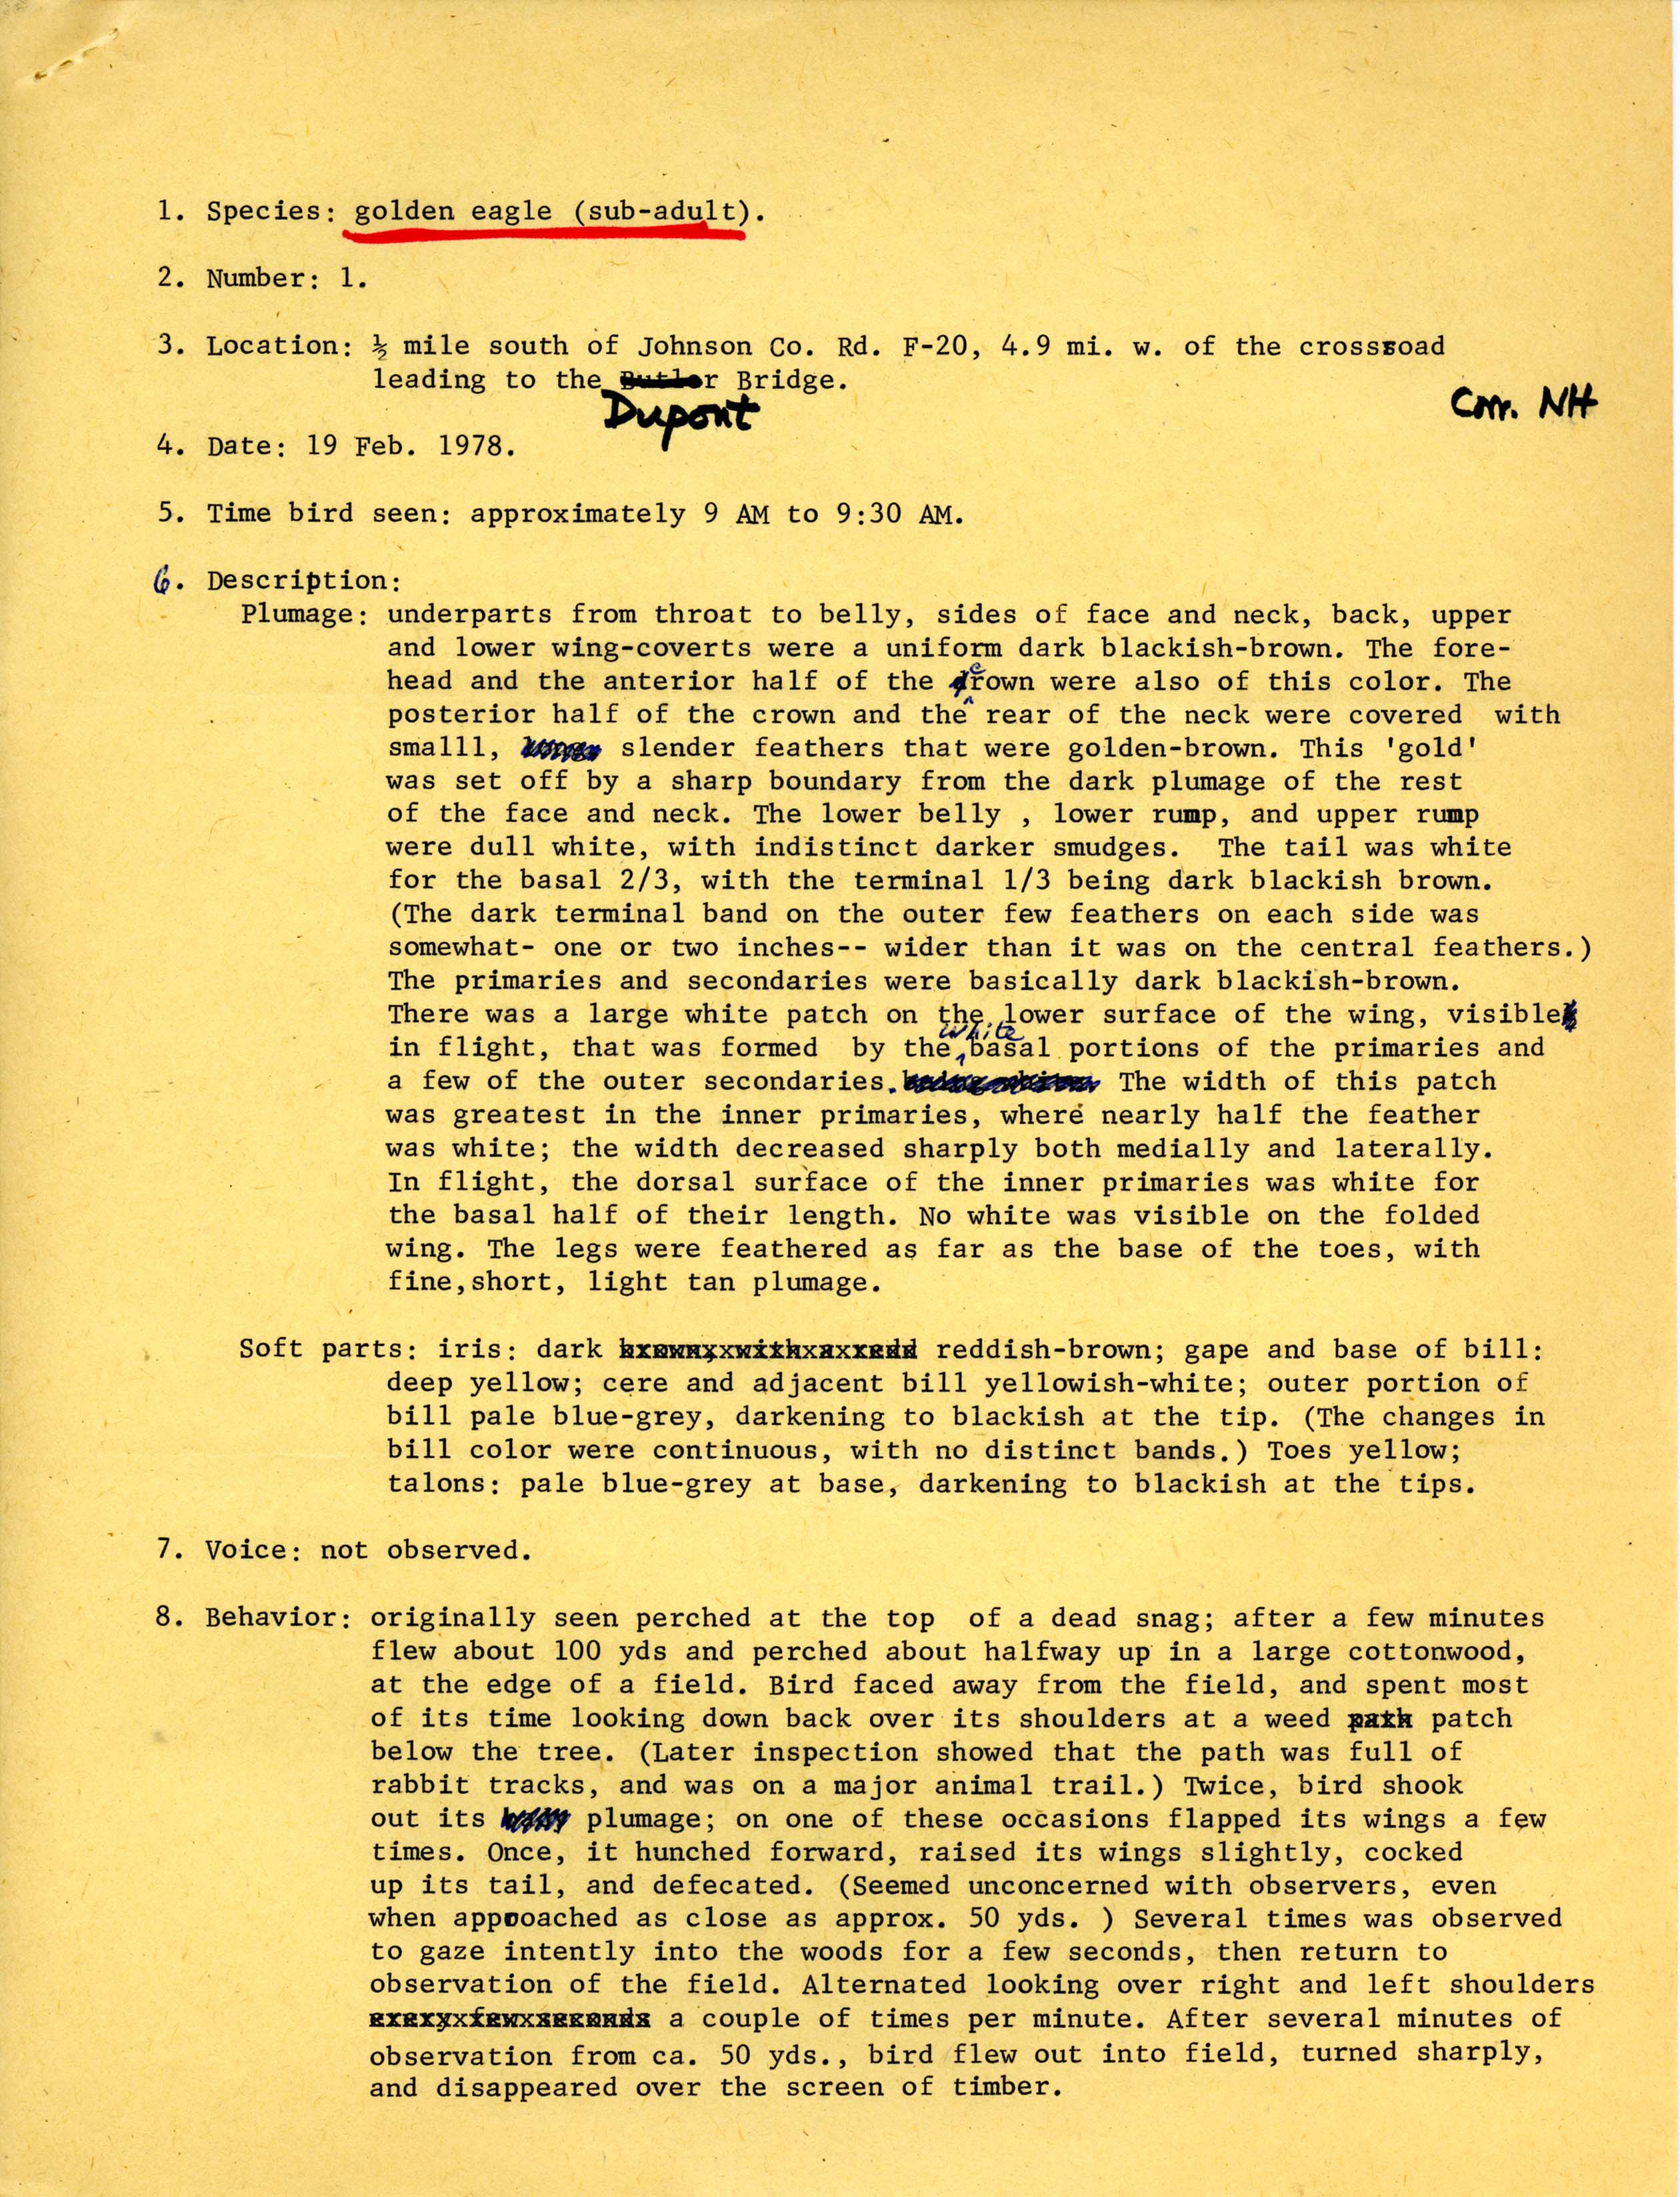 Rare bird documentation form for Golden Eagle at the Dupont Bridge in Hawkeye Wildlife Management Area, 1978